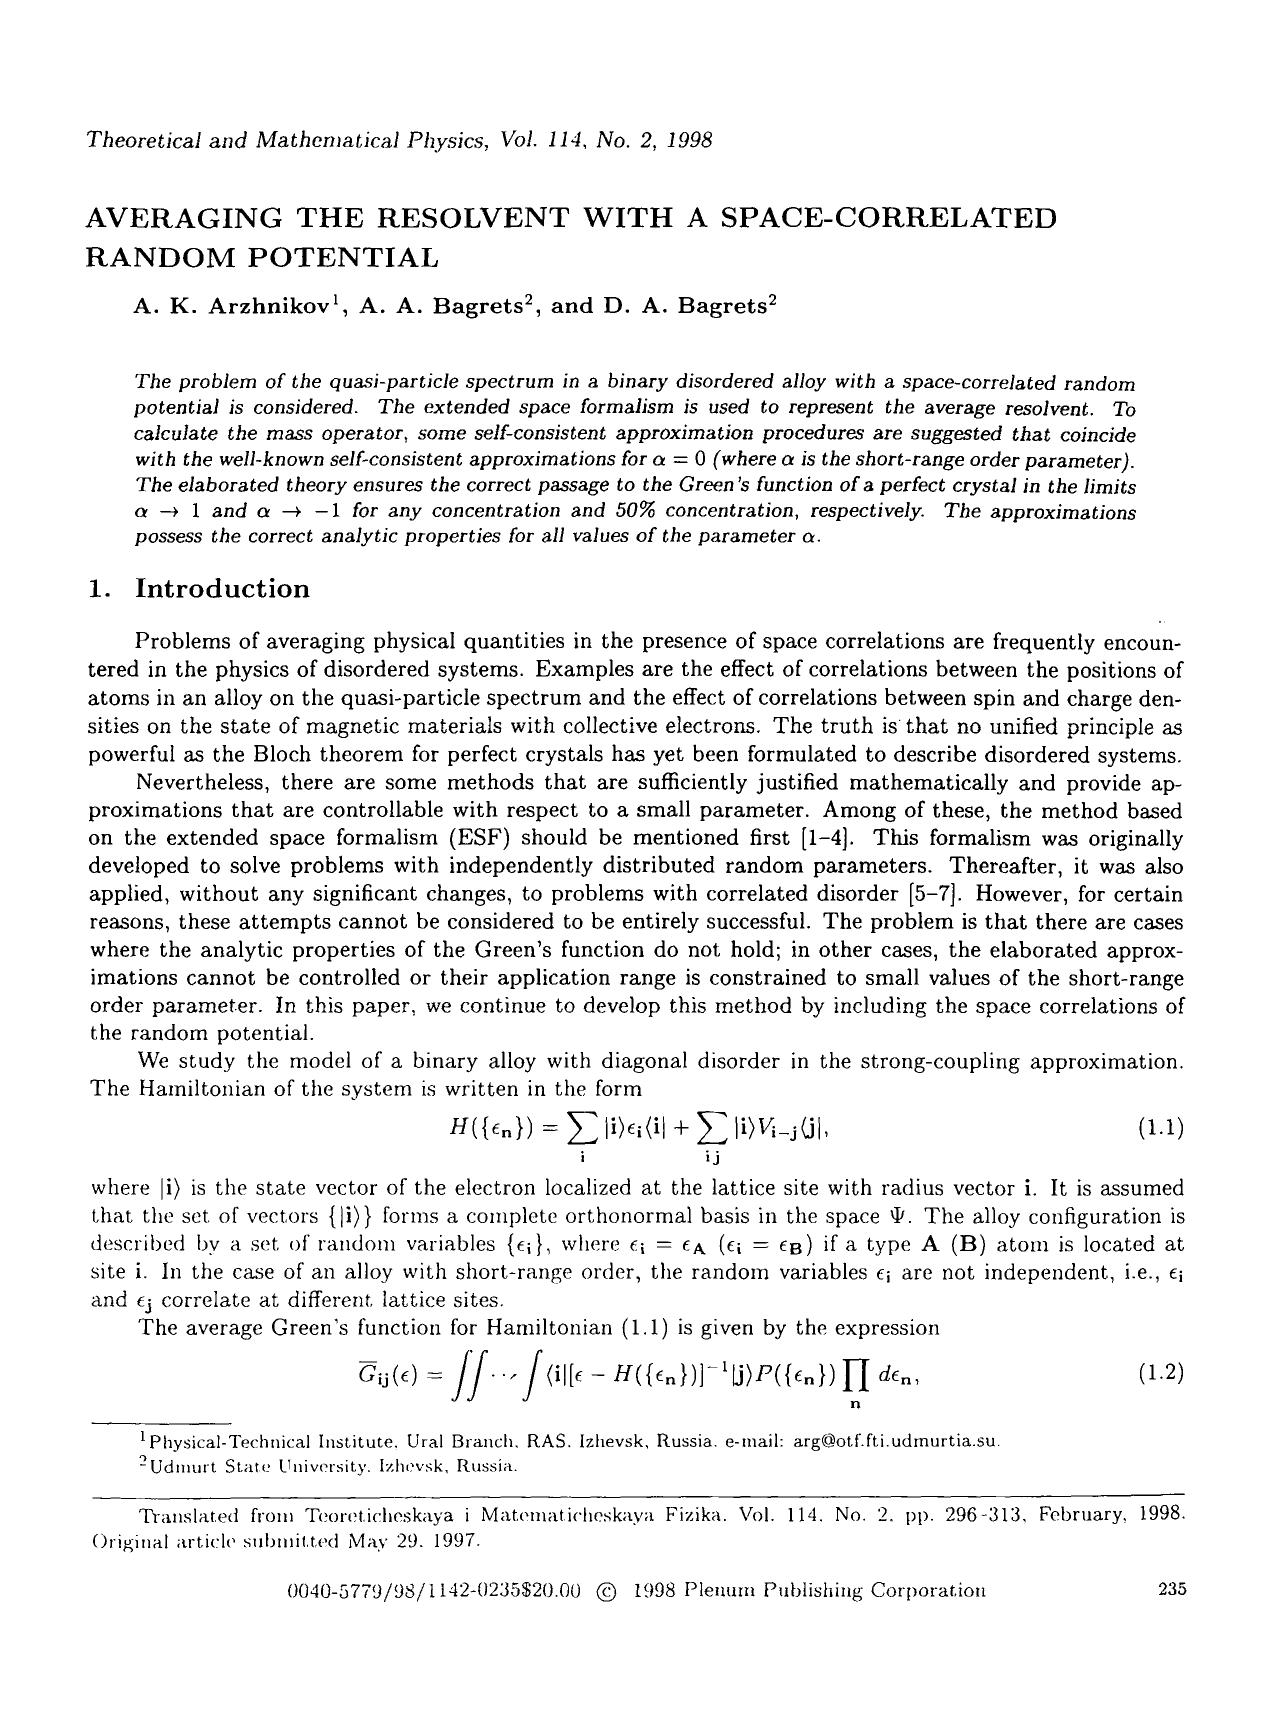 Averaging the resolvent with a space-correlated random potential by Unknown